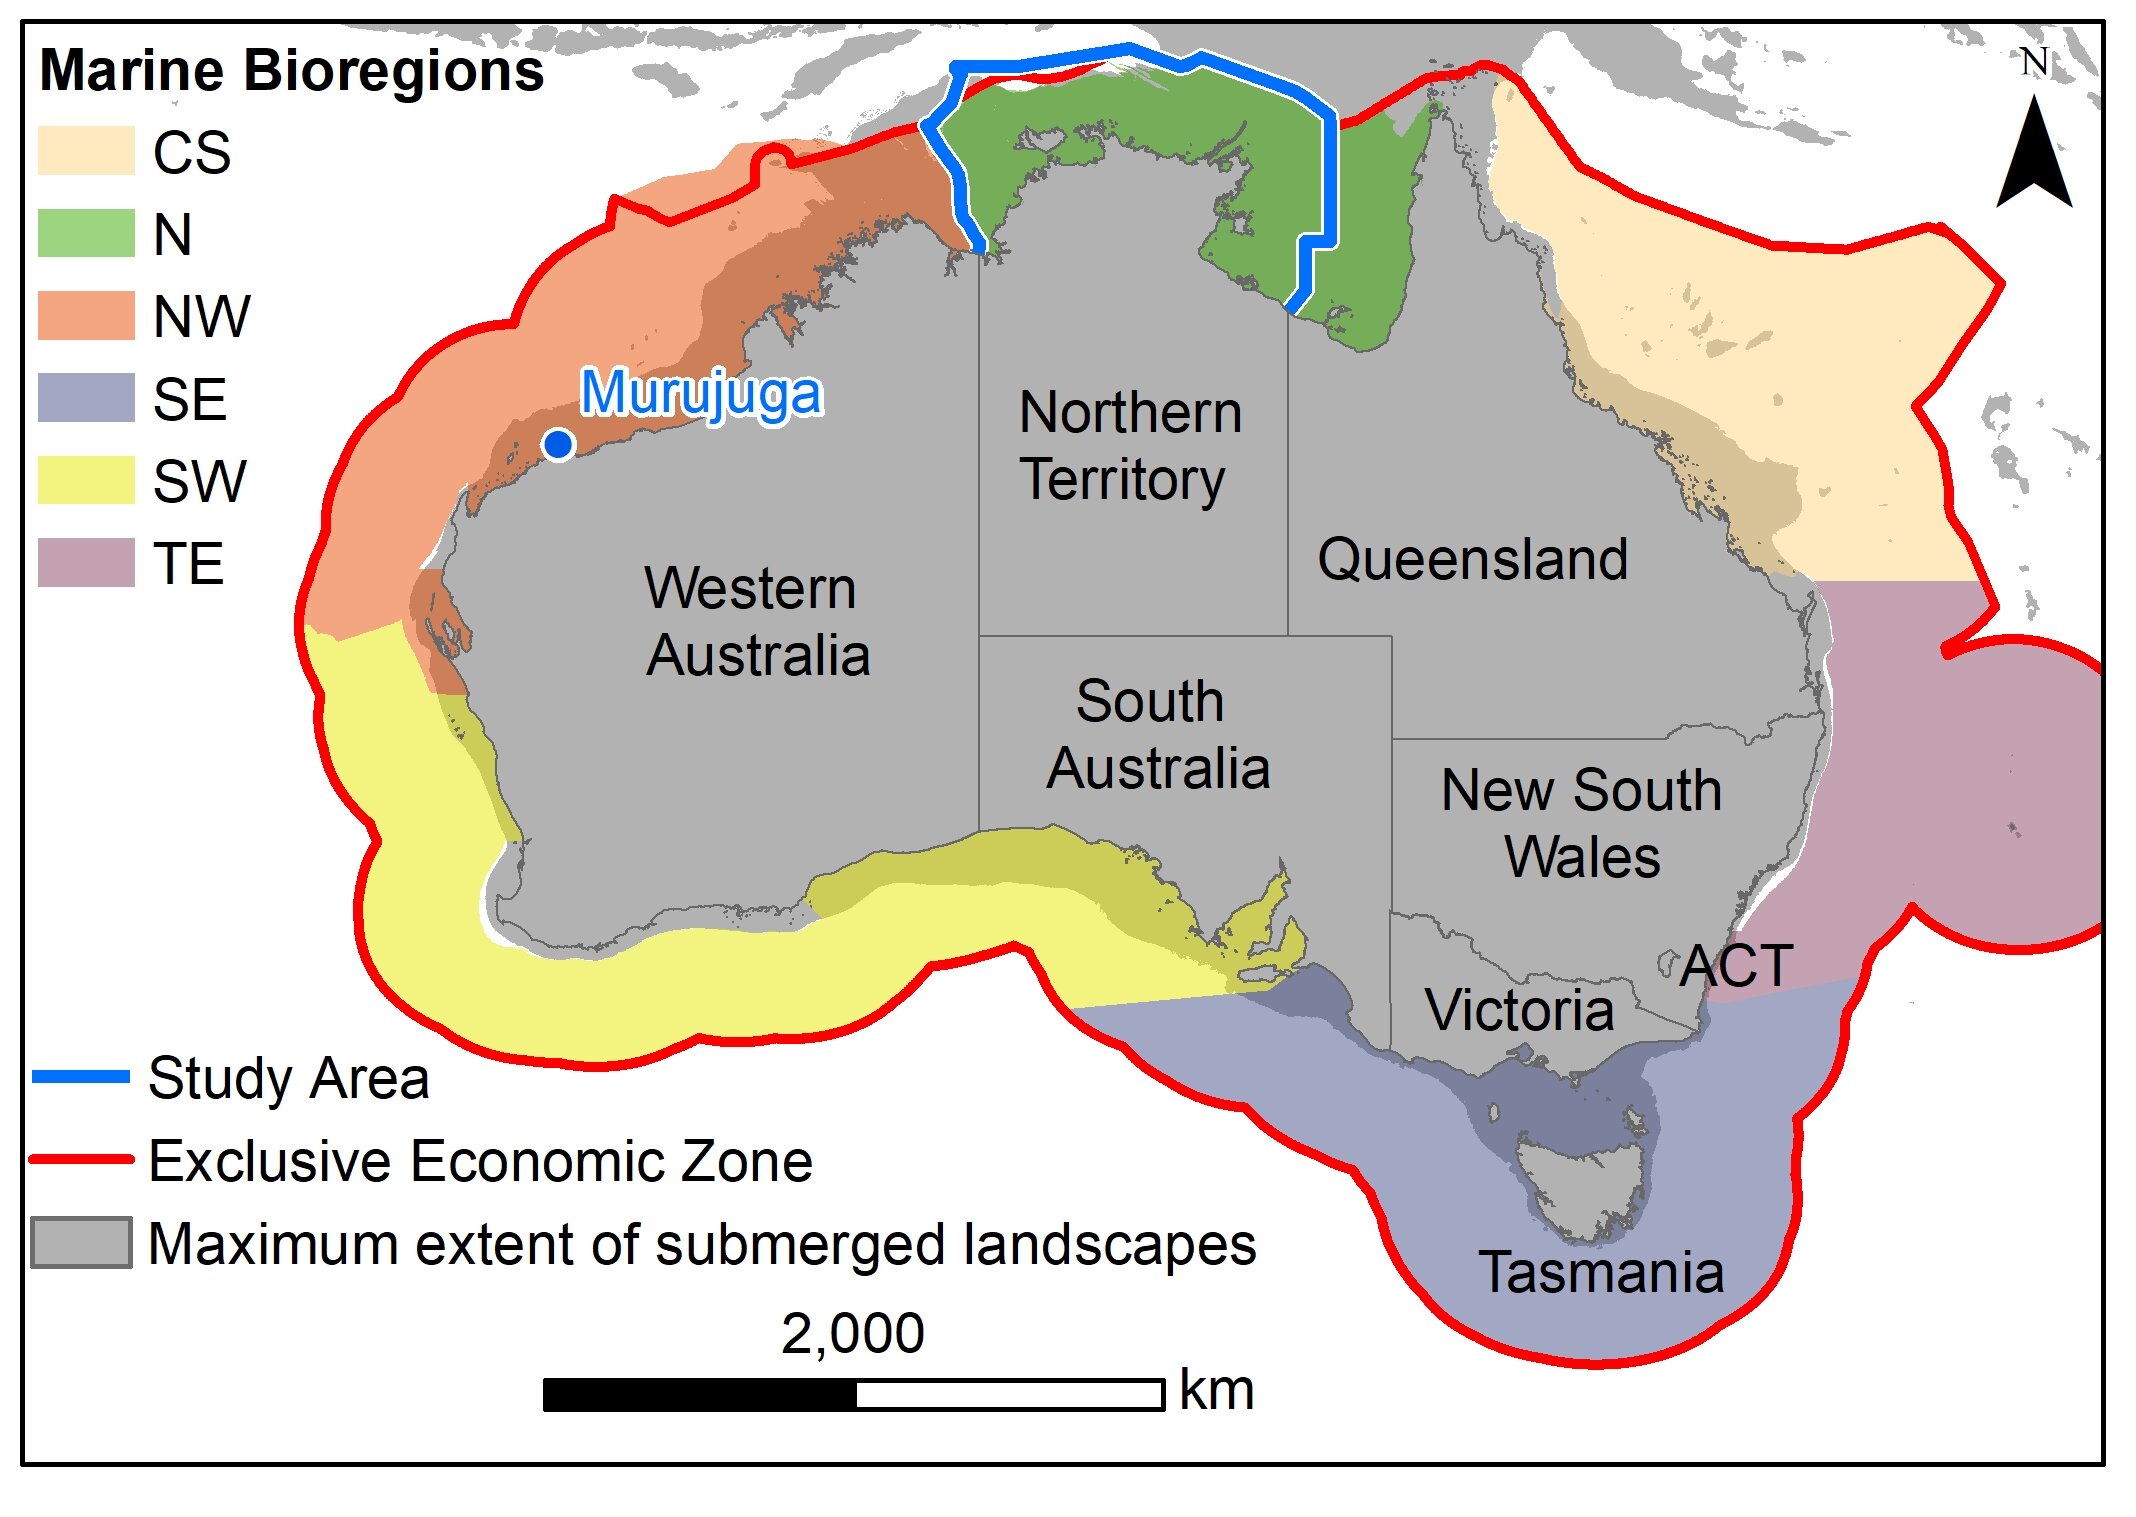 New archeological discoveries in Australia highlight lack of protections for sub..